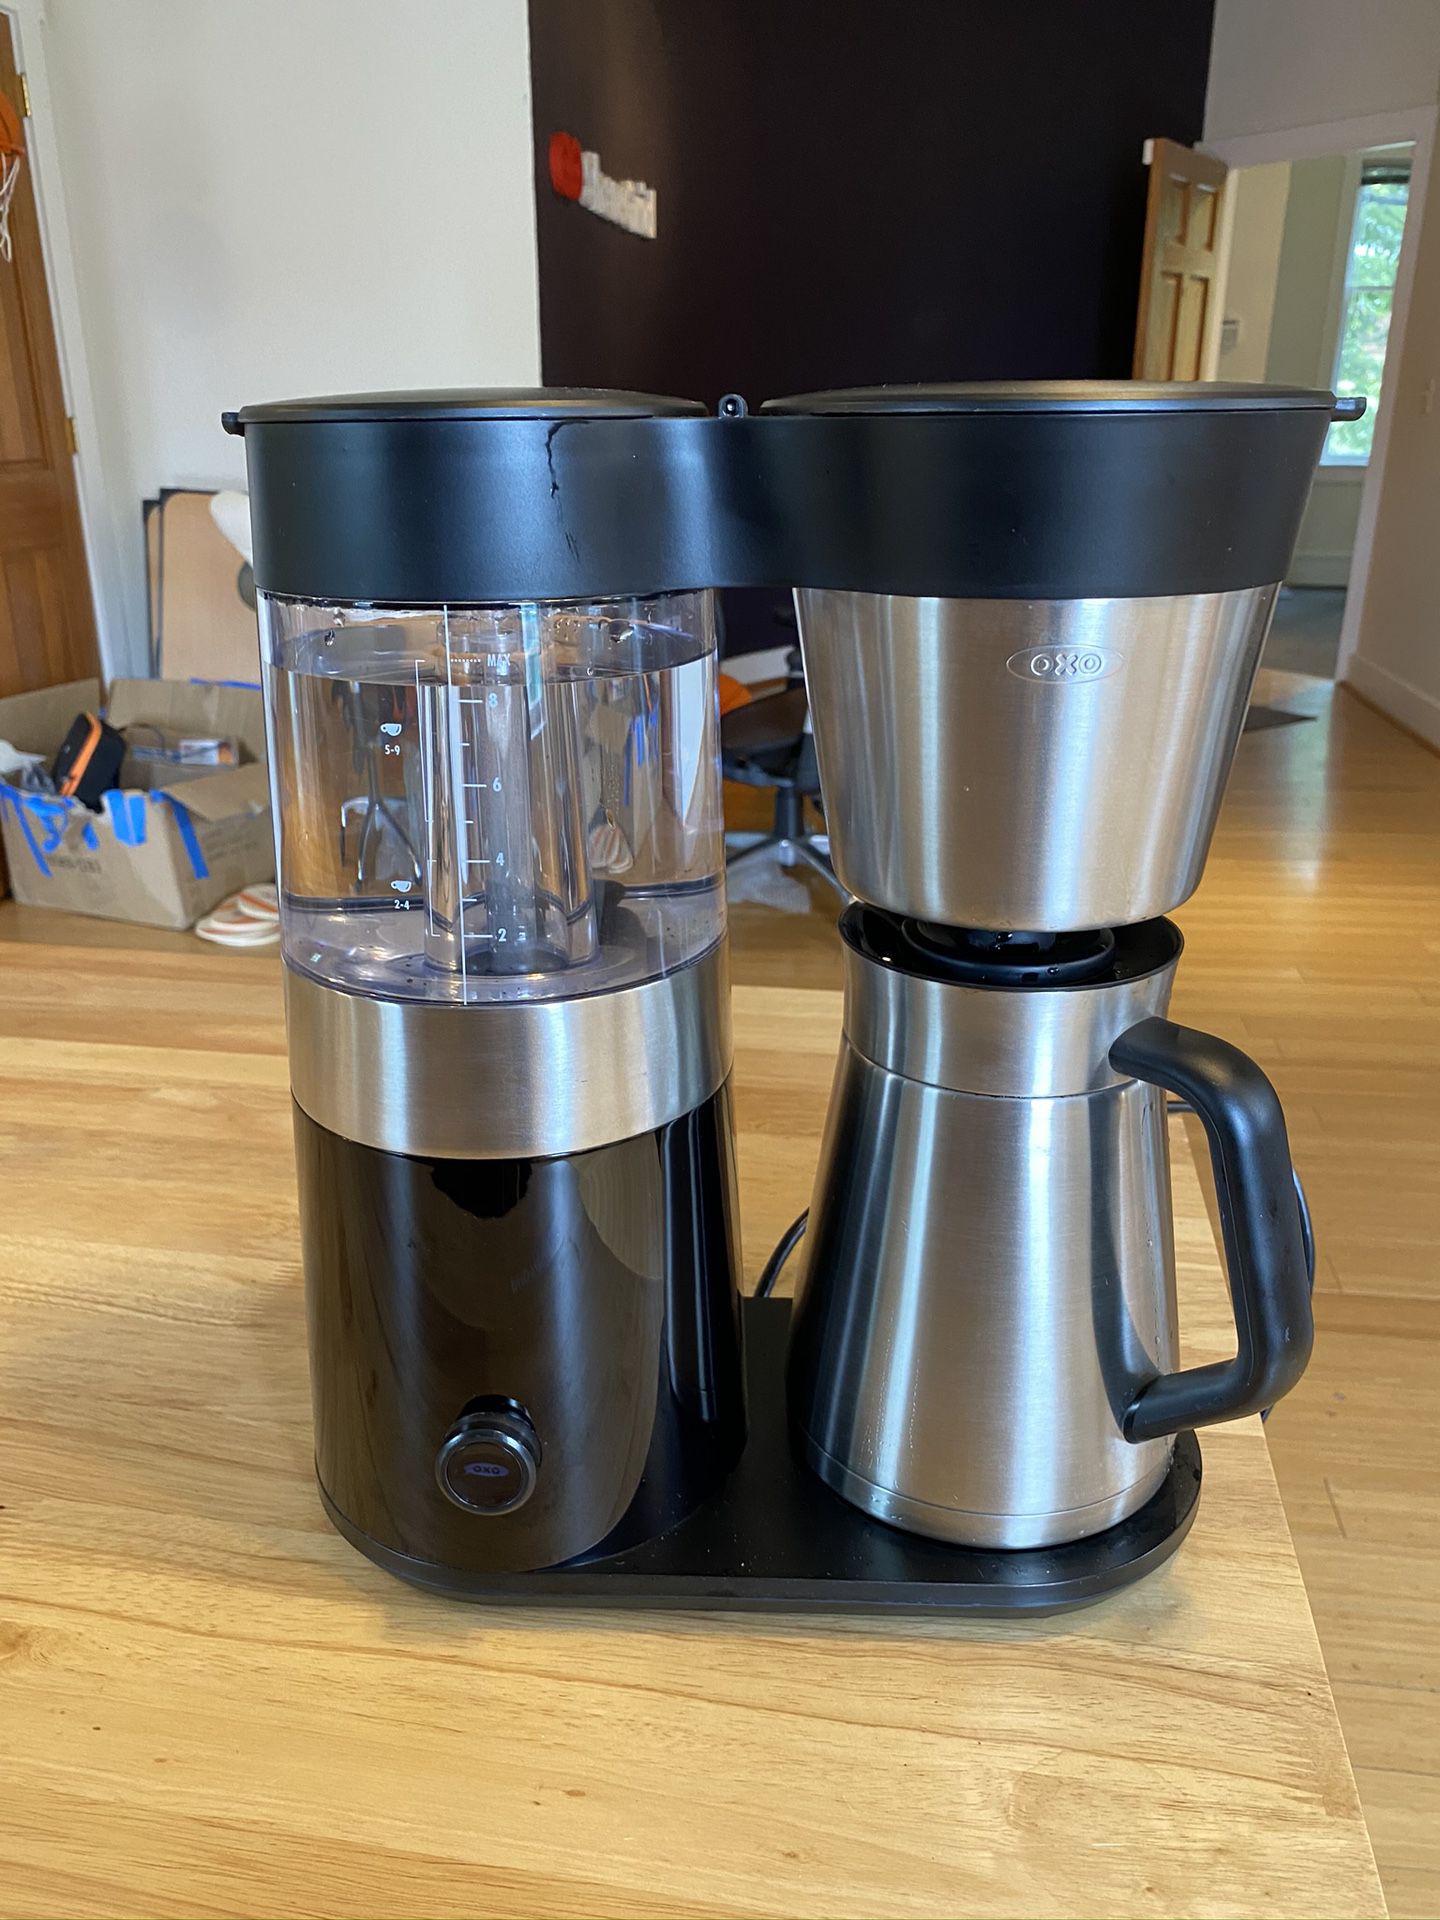 OXO Brew 9 cup coffee maker